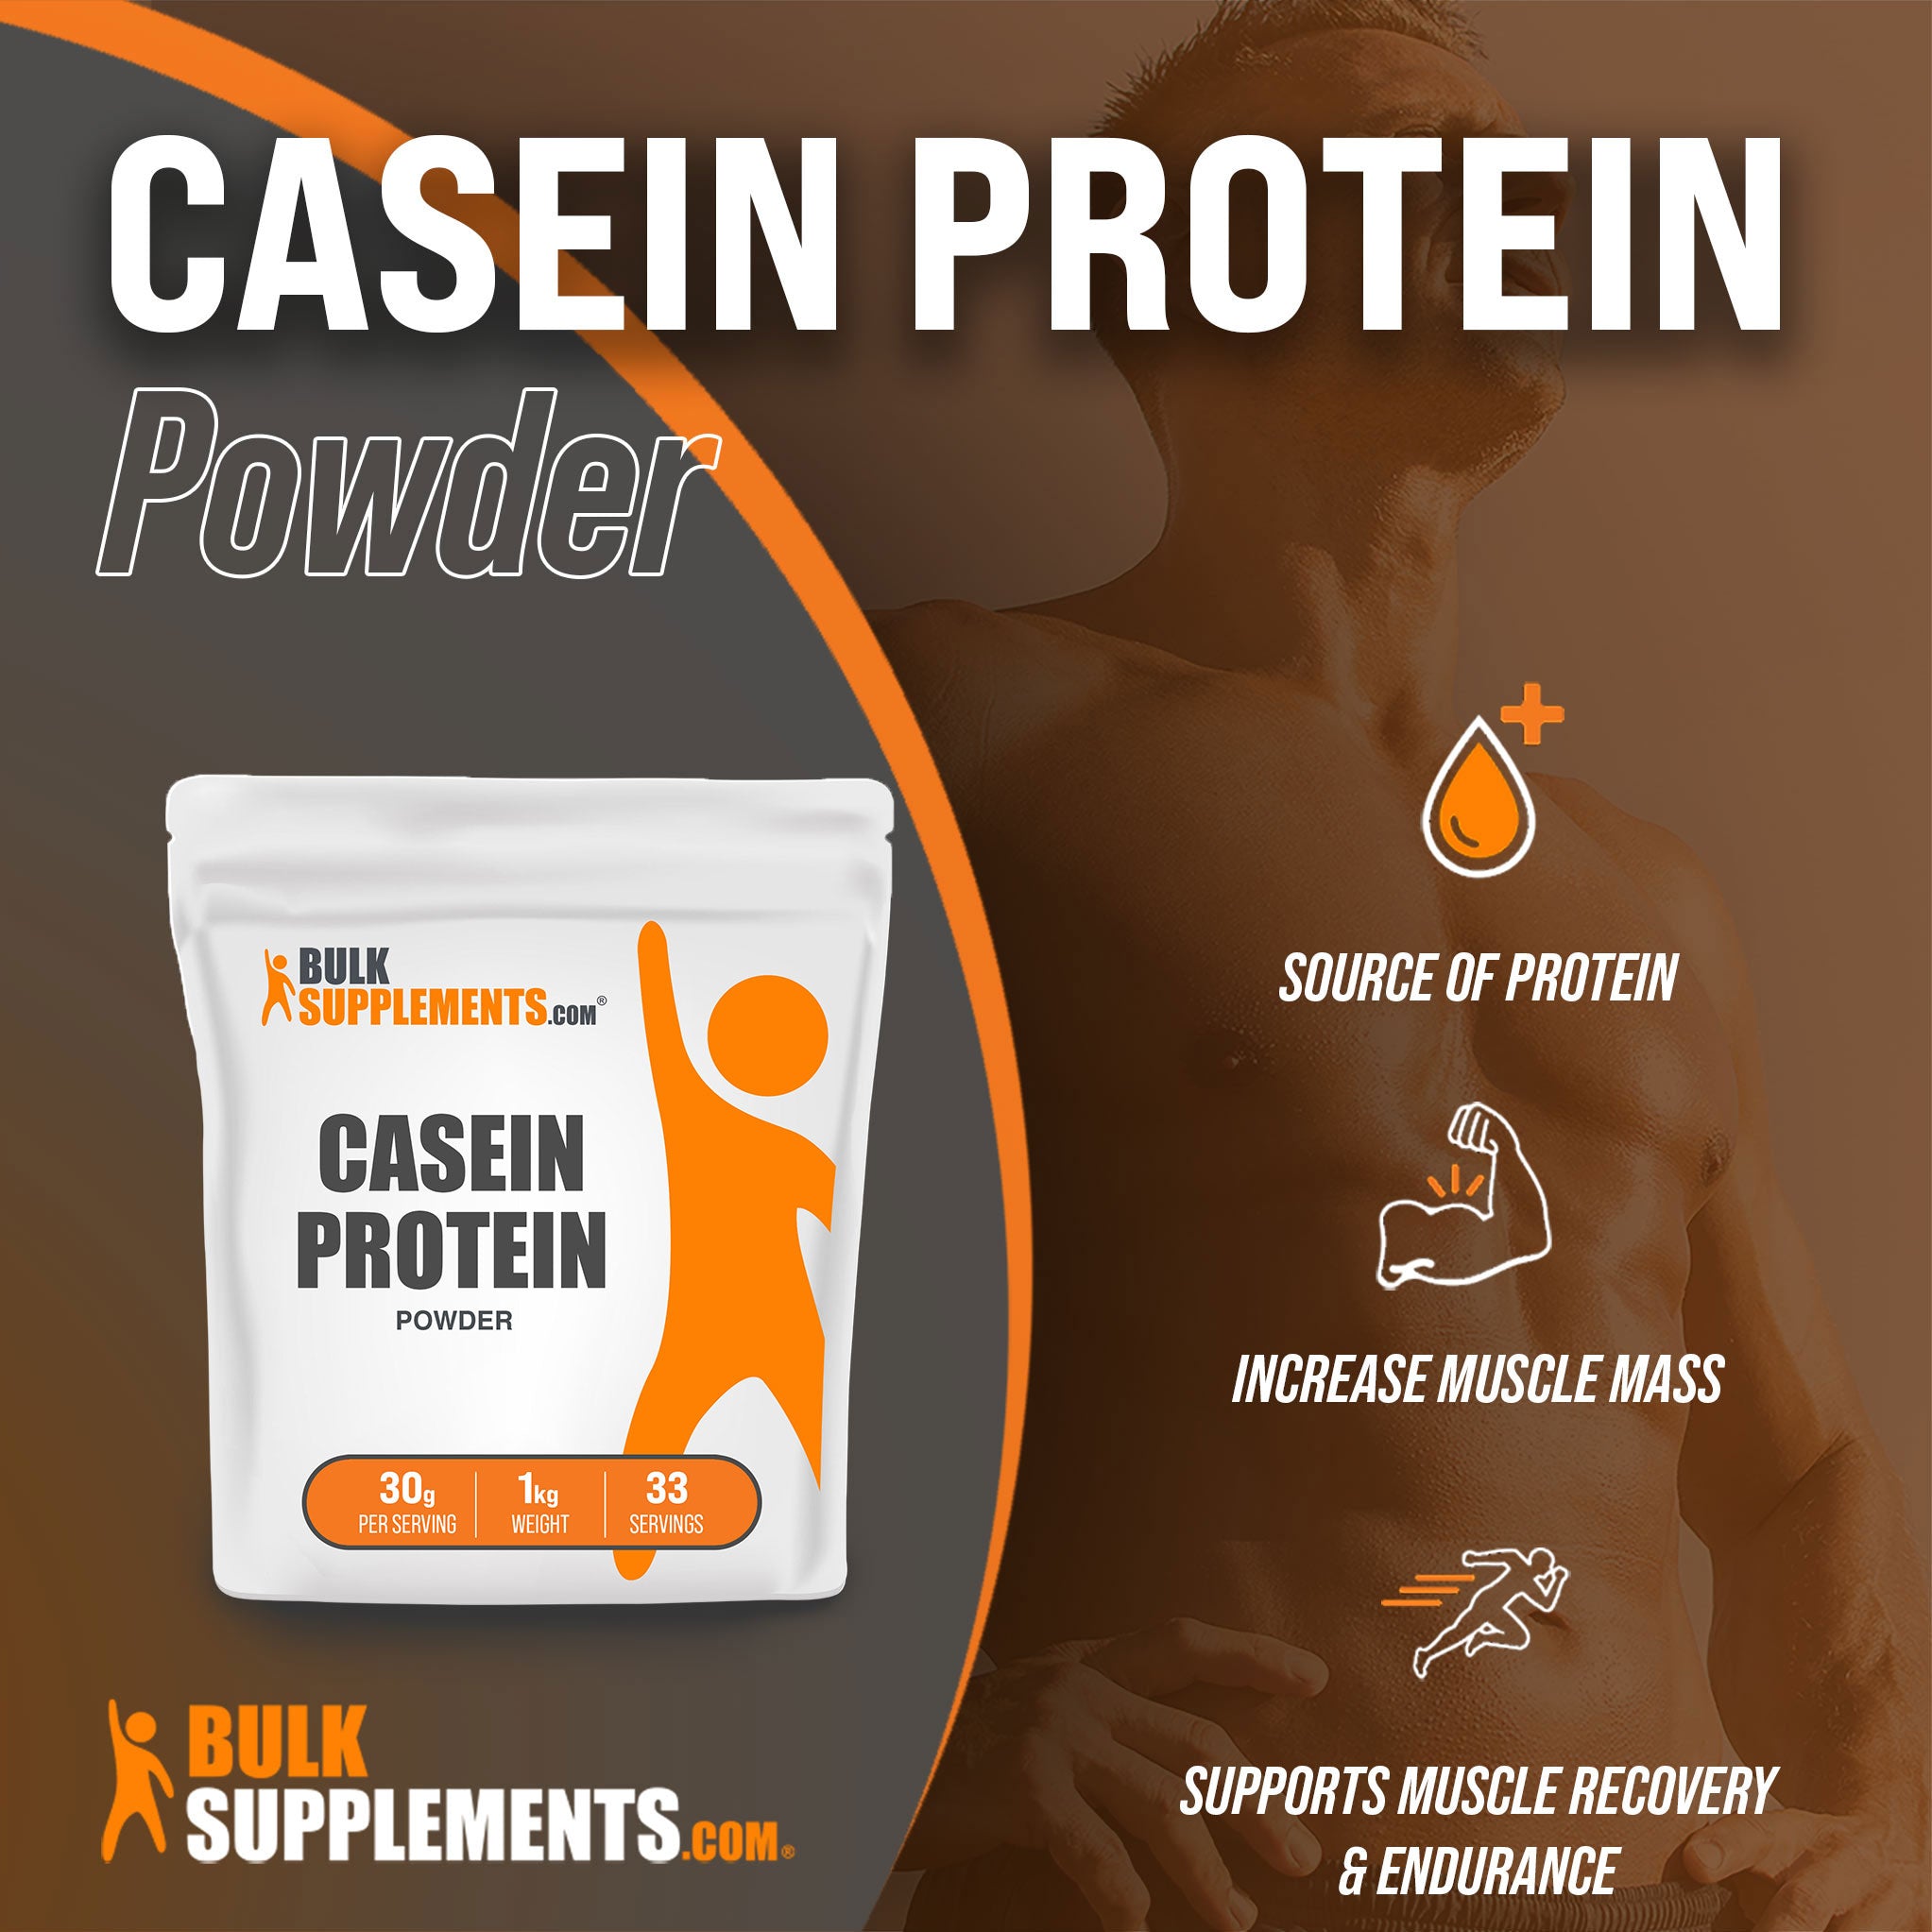 Benefits of Casein Protein Powder; source of protein, increase muscle mass, supports muscle recovery & endurance